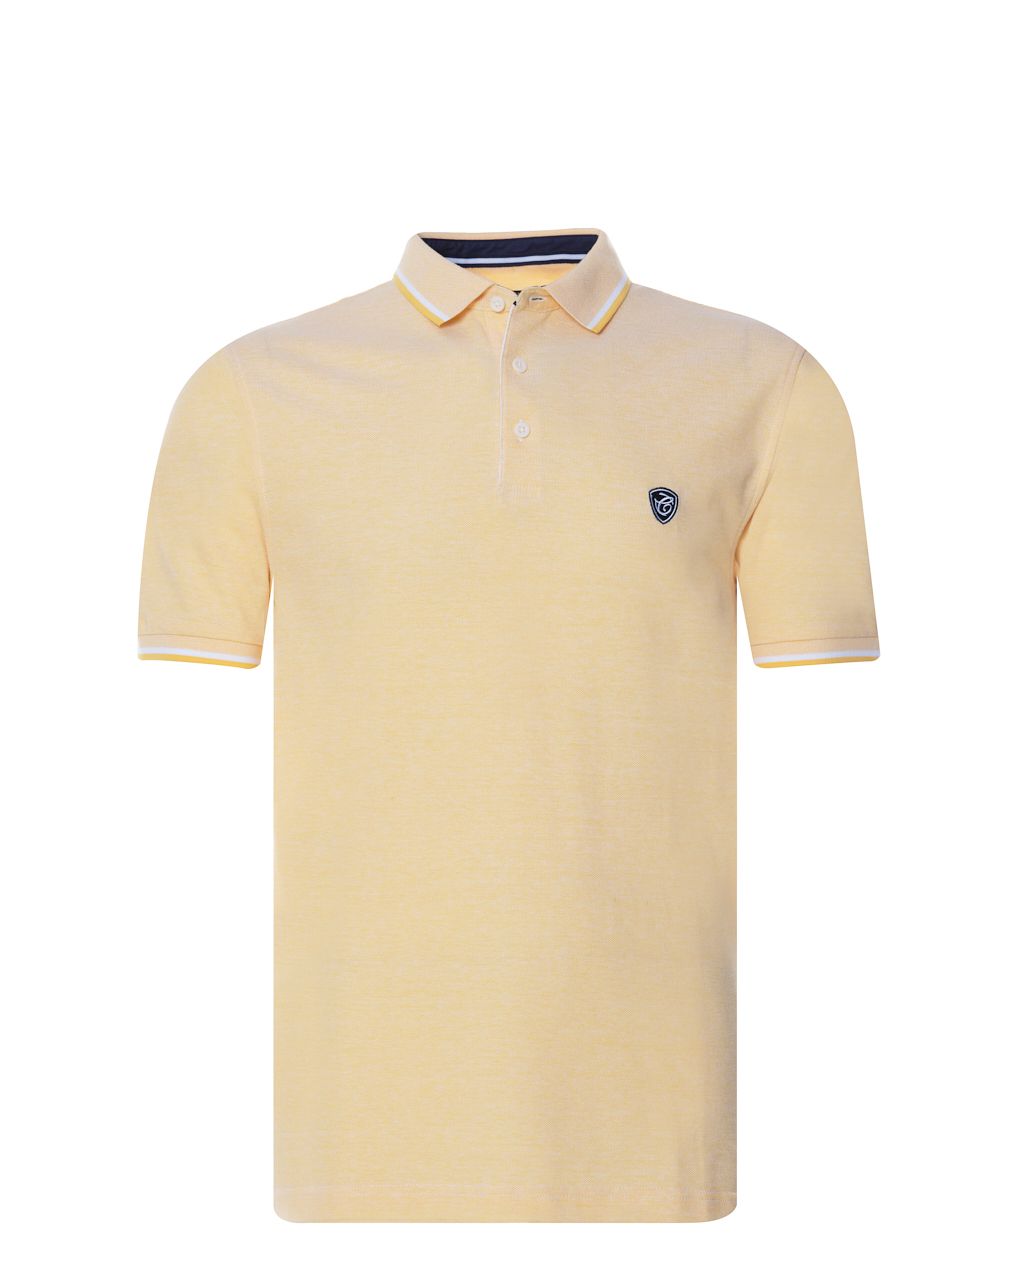 Campbell Classic Yardville Polo KM Geel uni 071724-005-L